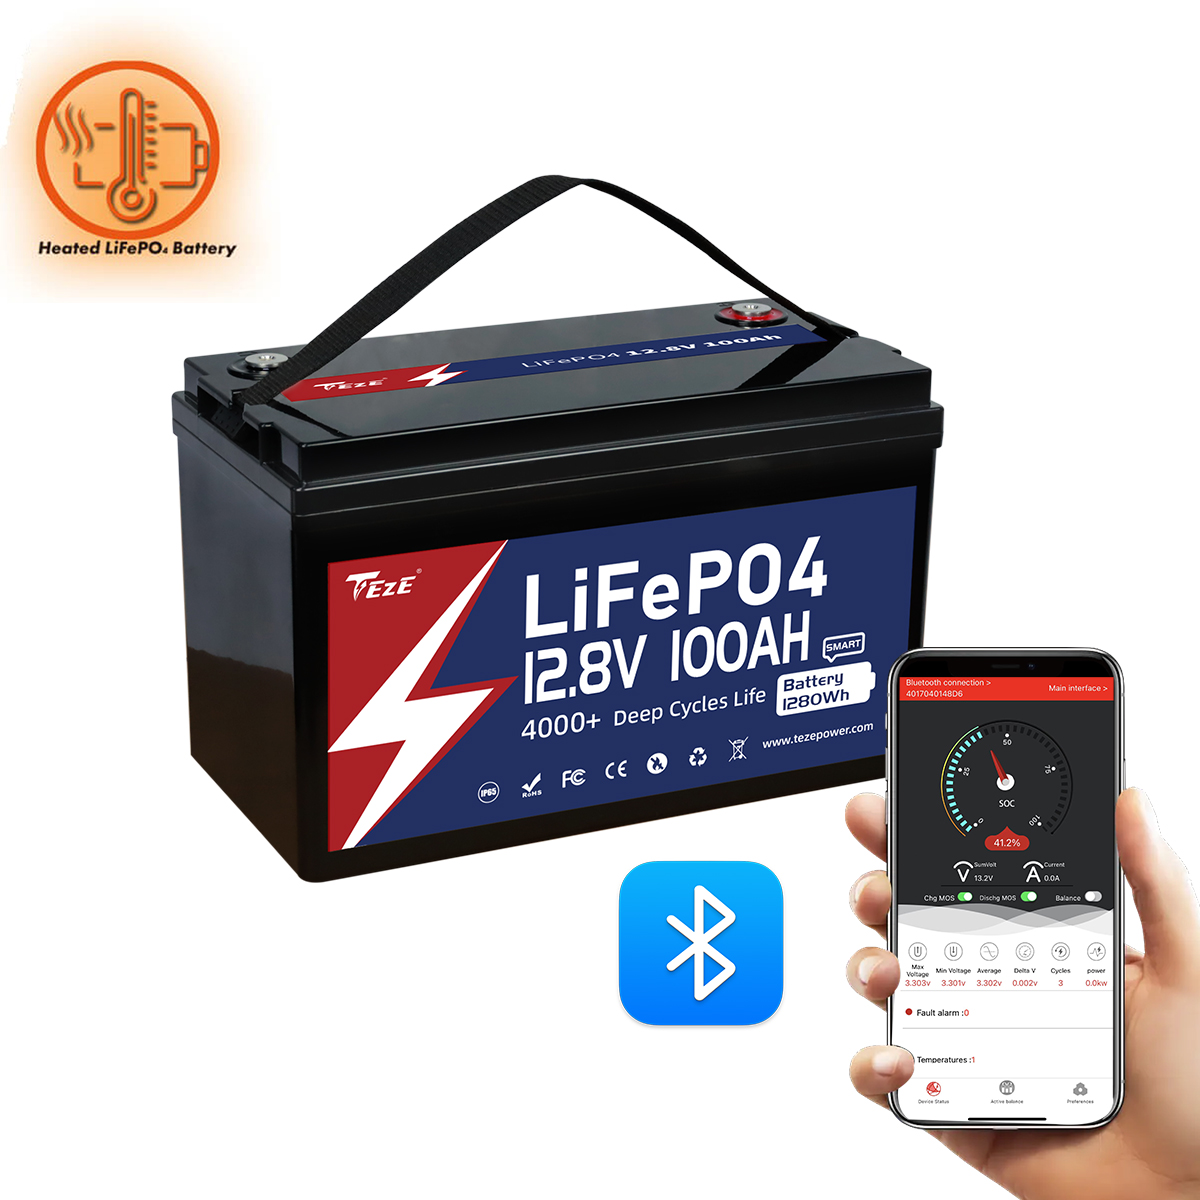 TezePower 12V 100Ah LiFePO4 Battery with Bluetooth, Self-heating and Active Balancer, Built-in 100A Daly BMS(Bluetooth Built-in Version)